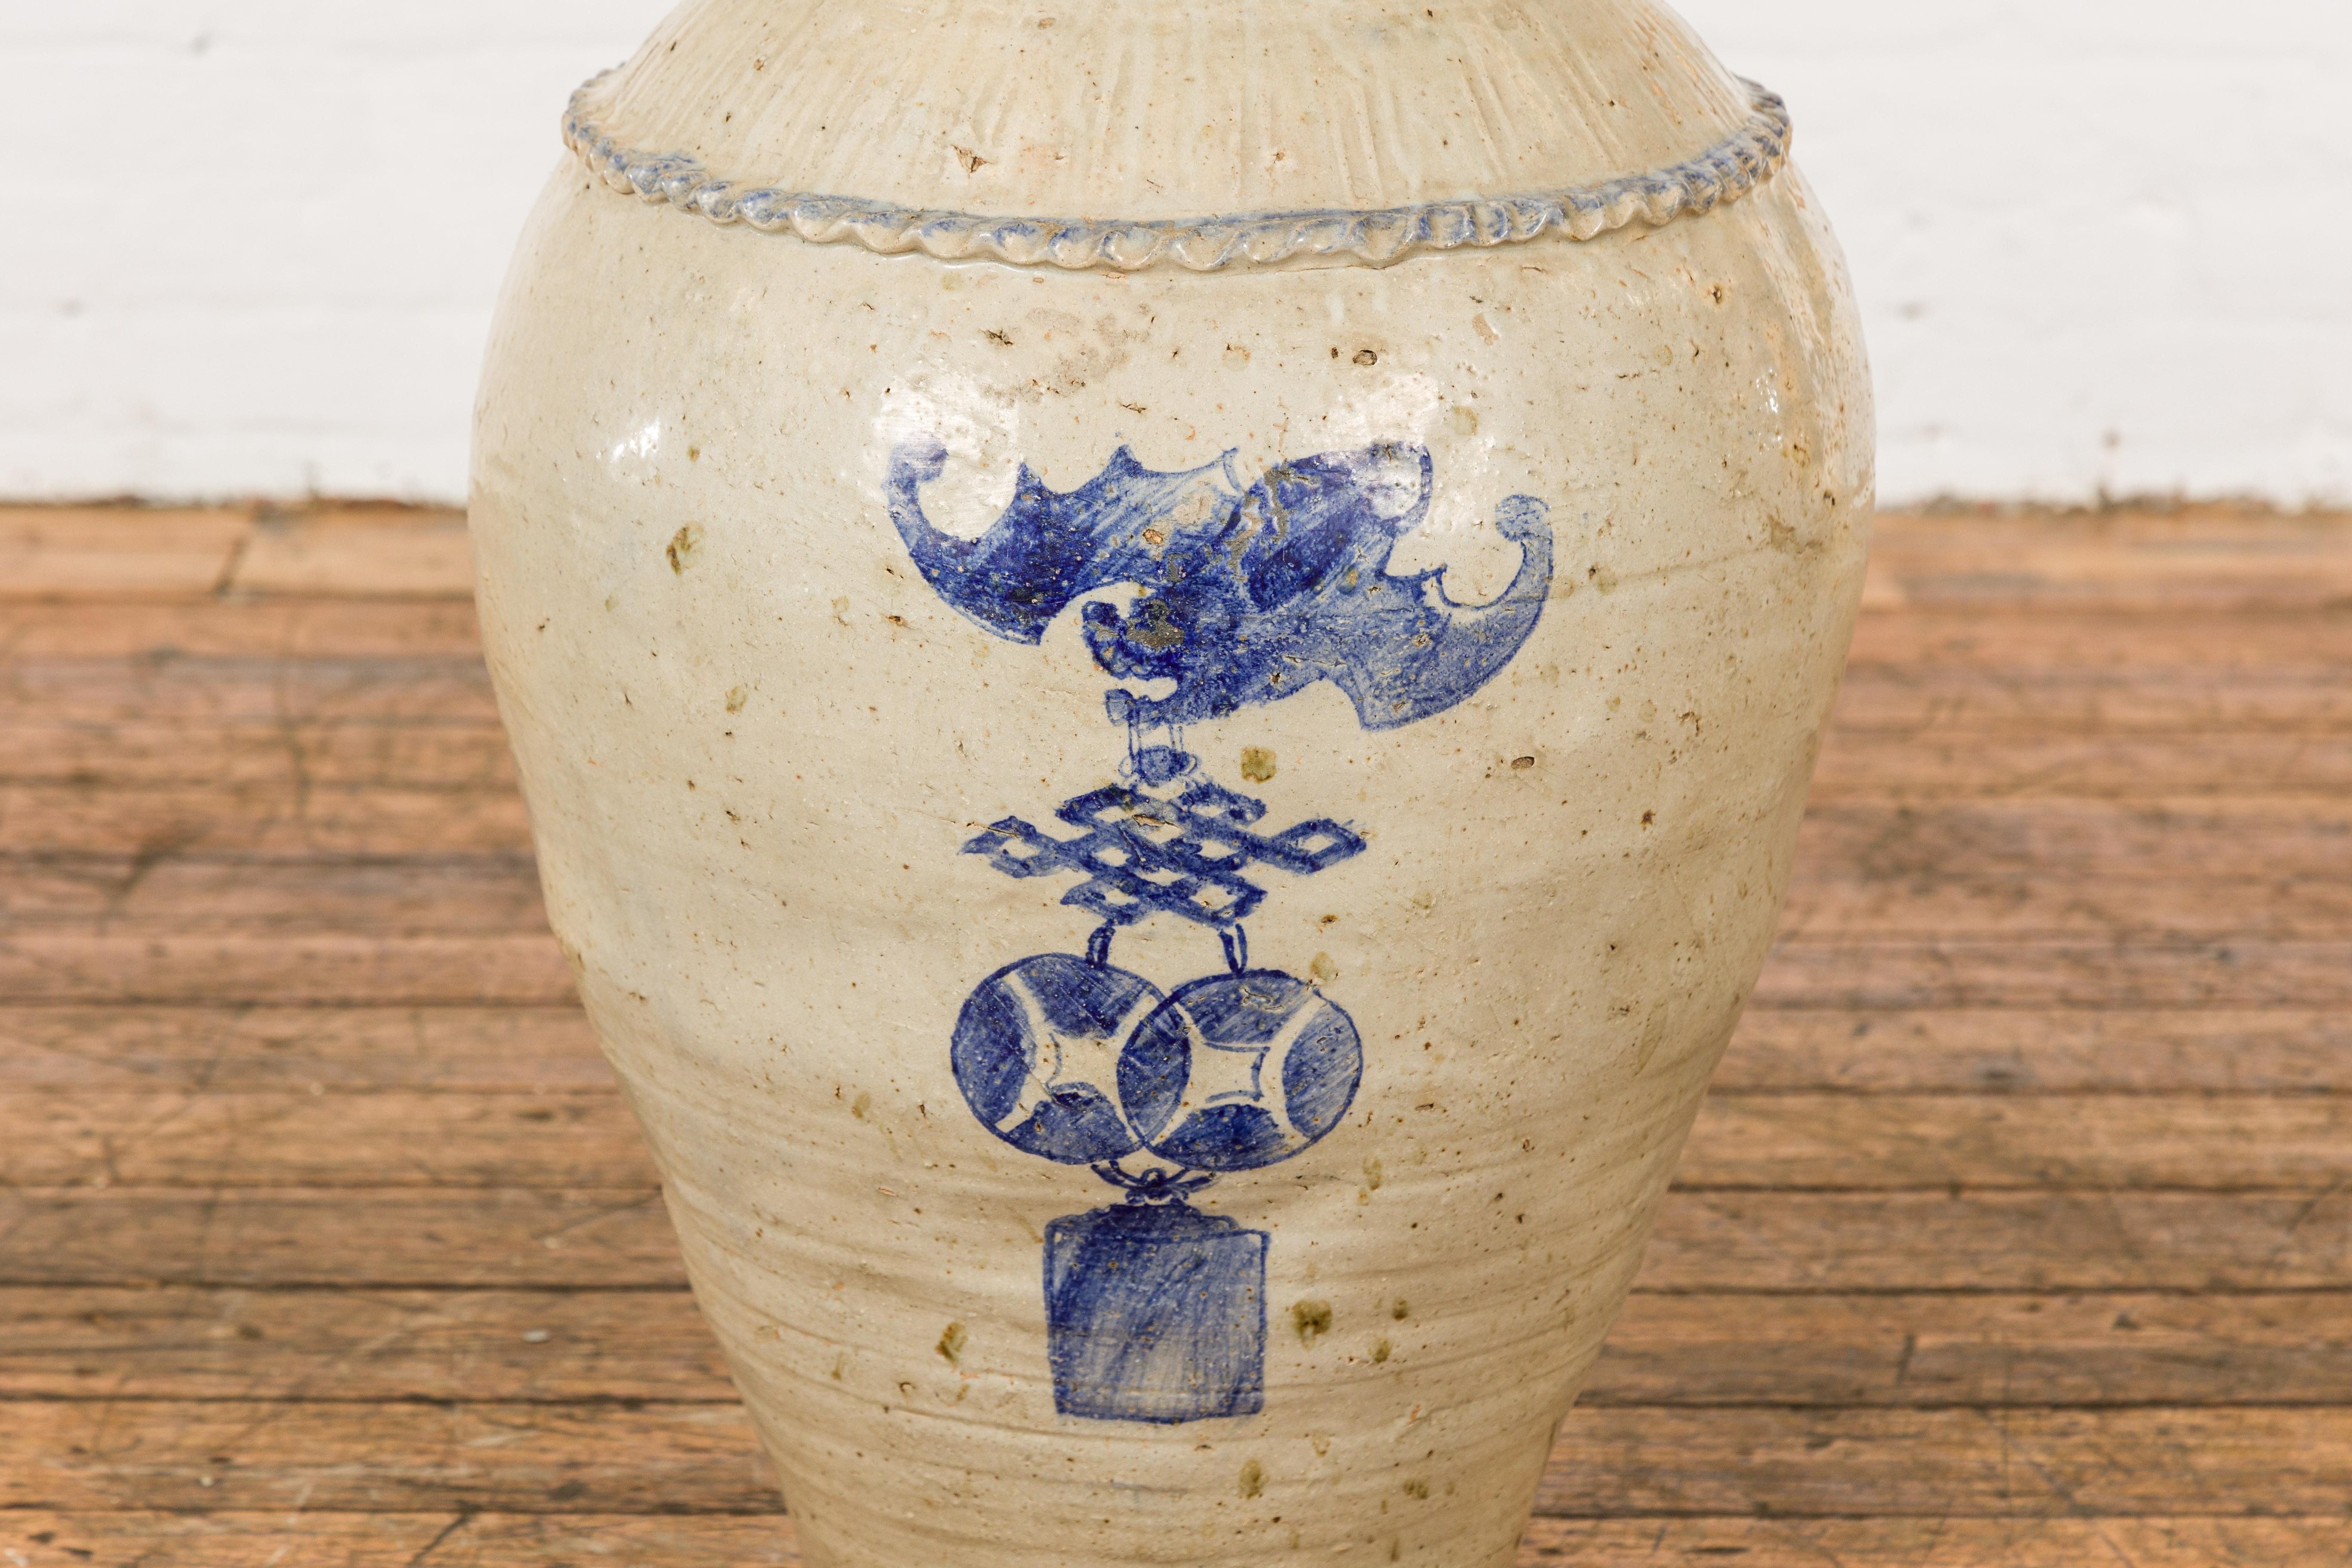 Antique Chinese Glazed Ceramic Storage Jar with Blue Painted Motifs For Sale 2